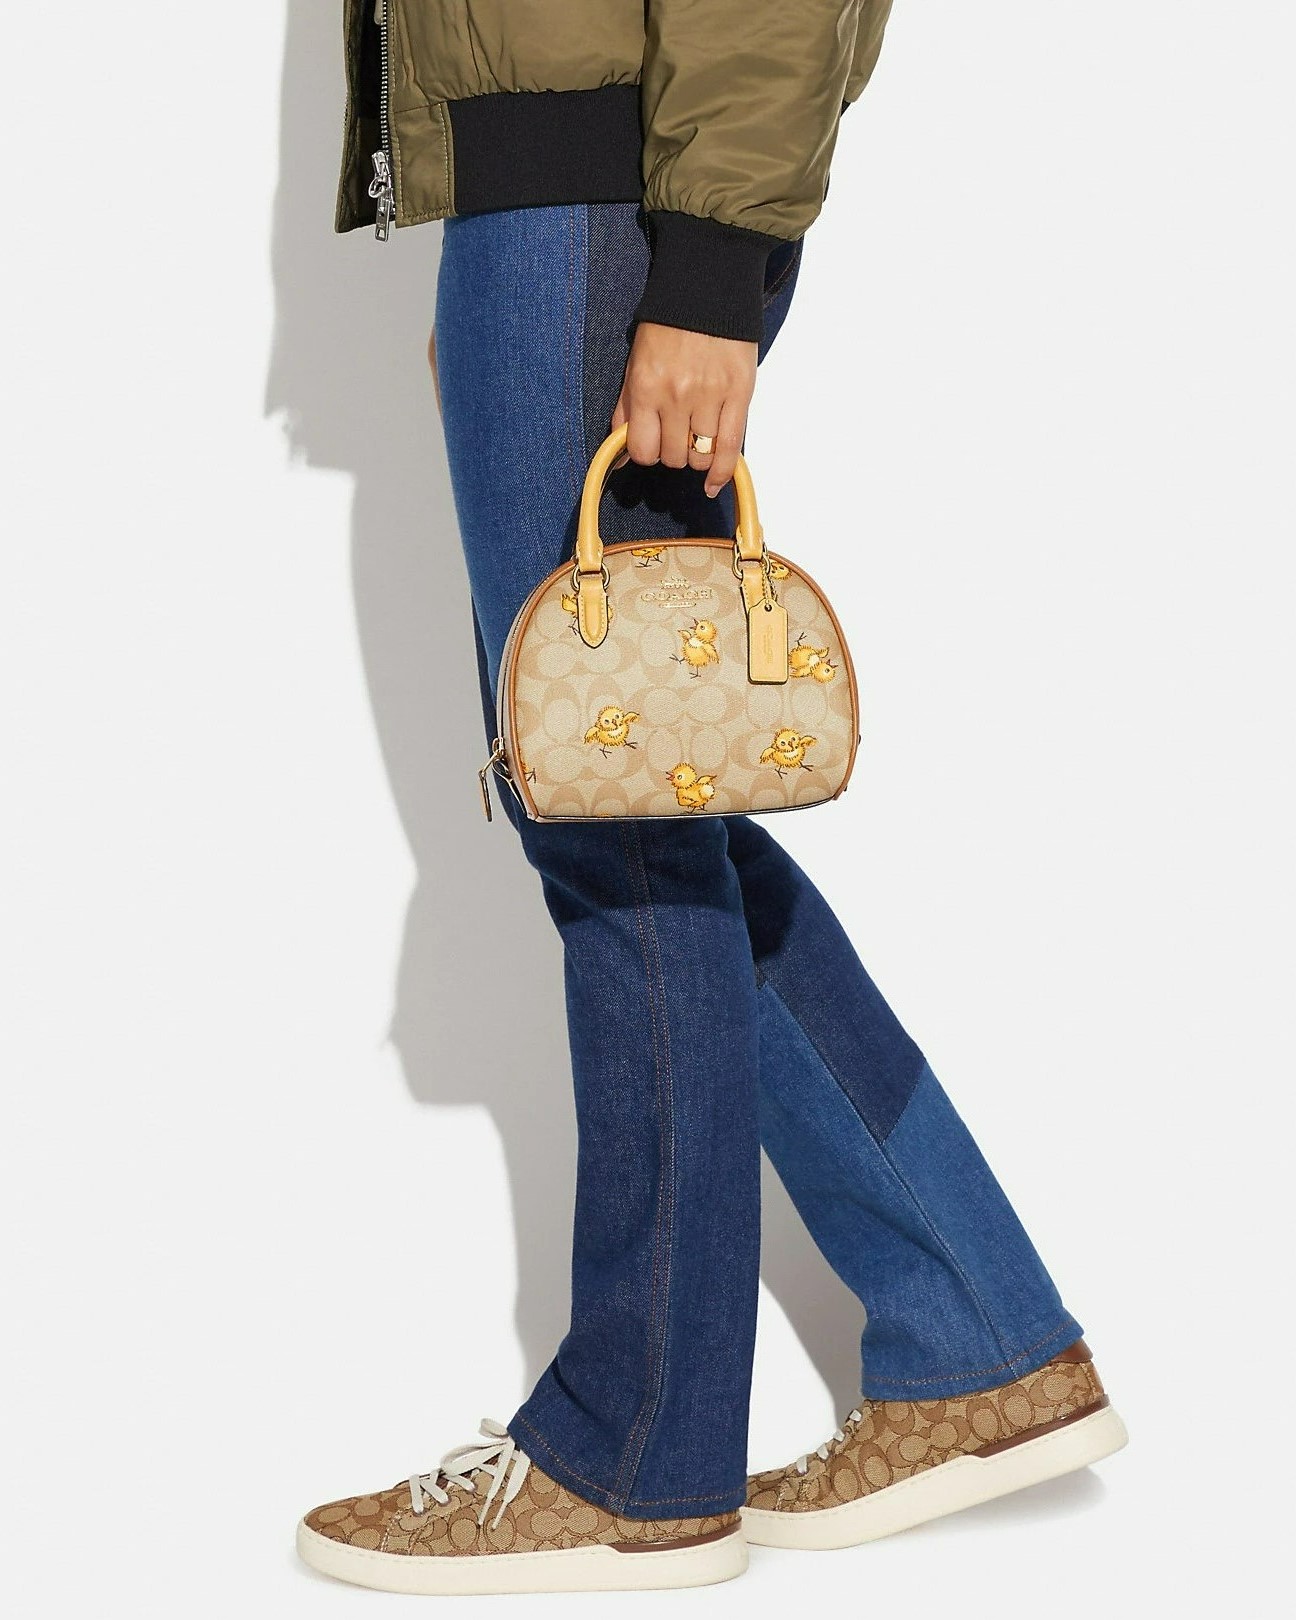 TÚI XÁCH COACH SYDNEY SATCHEL IN SIGNATURE CANVAS WITH TOSSED CHICK PRINT 5